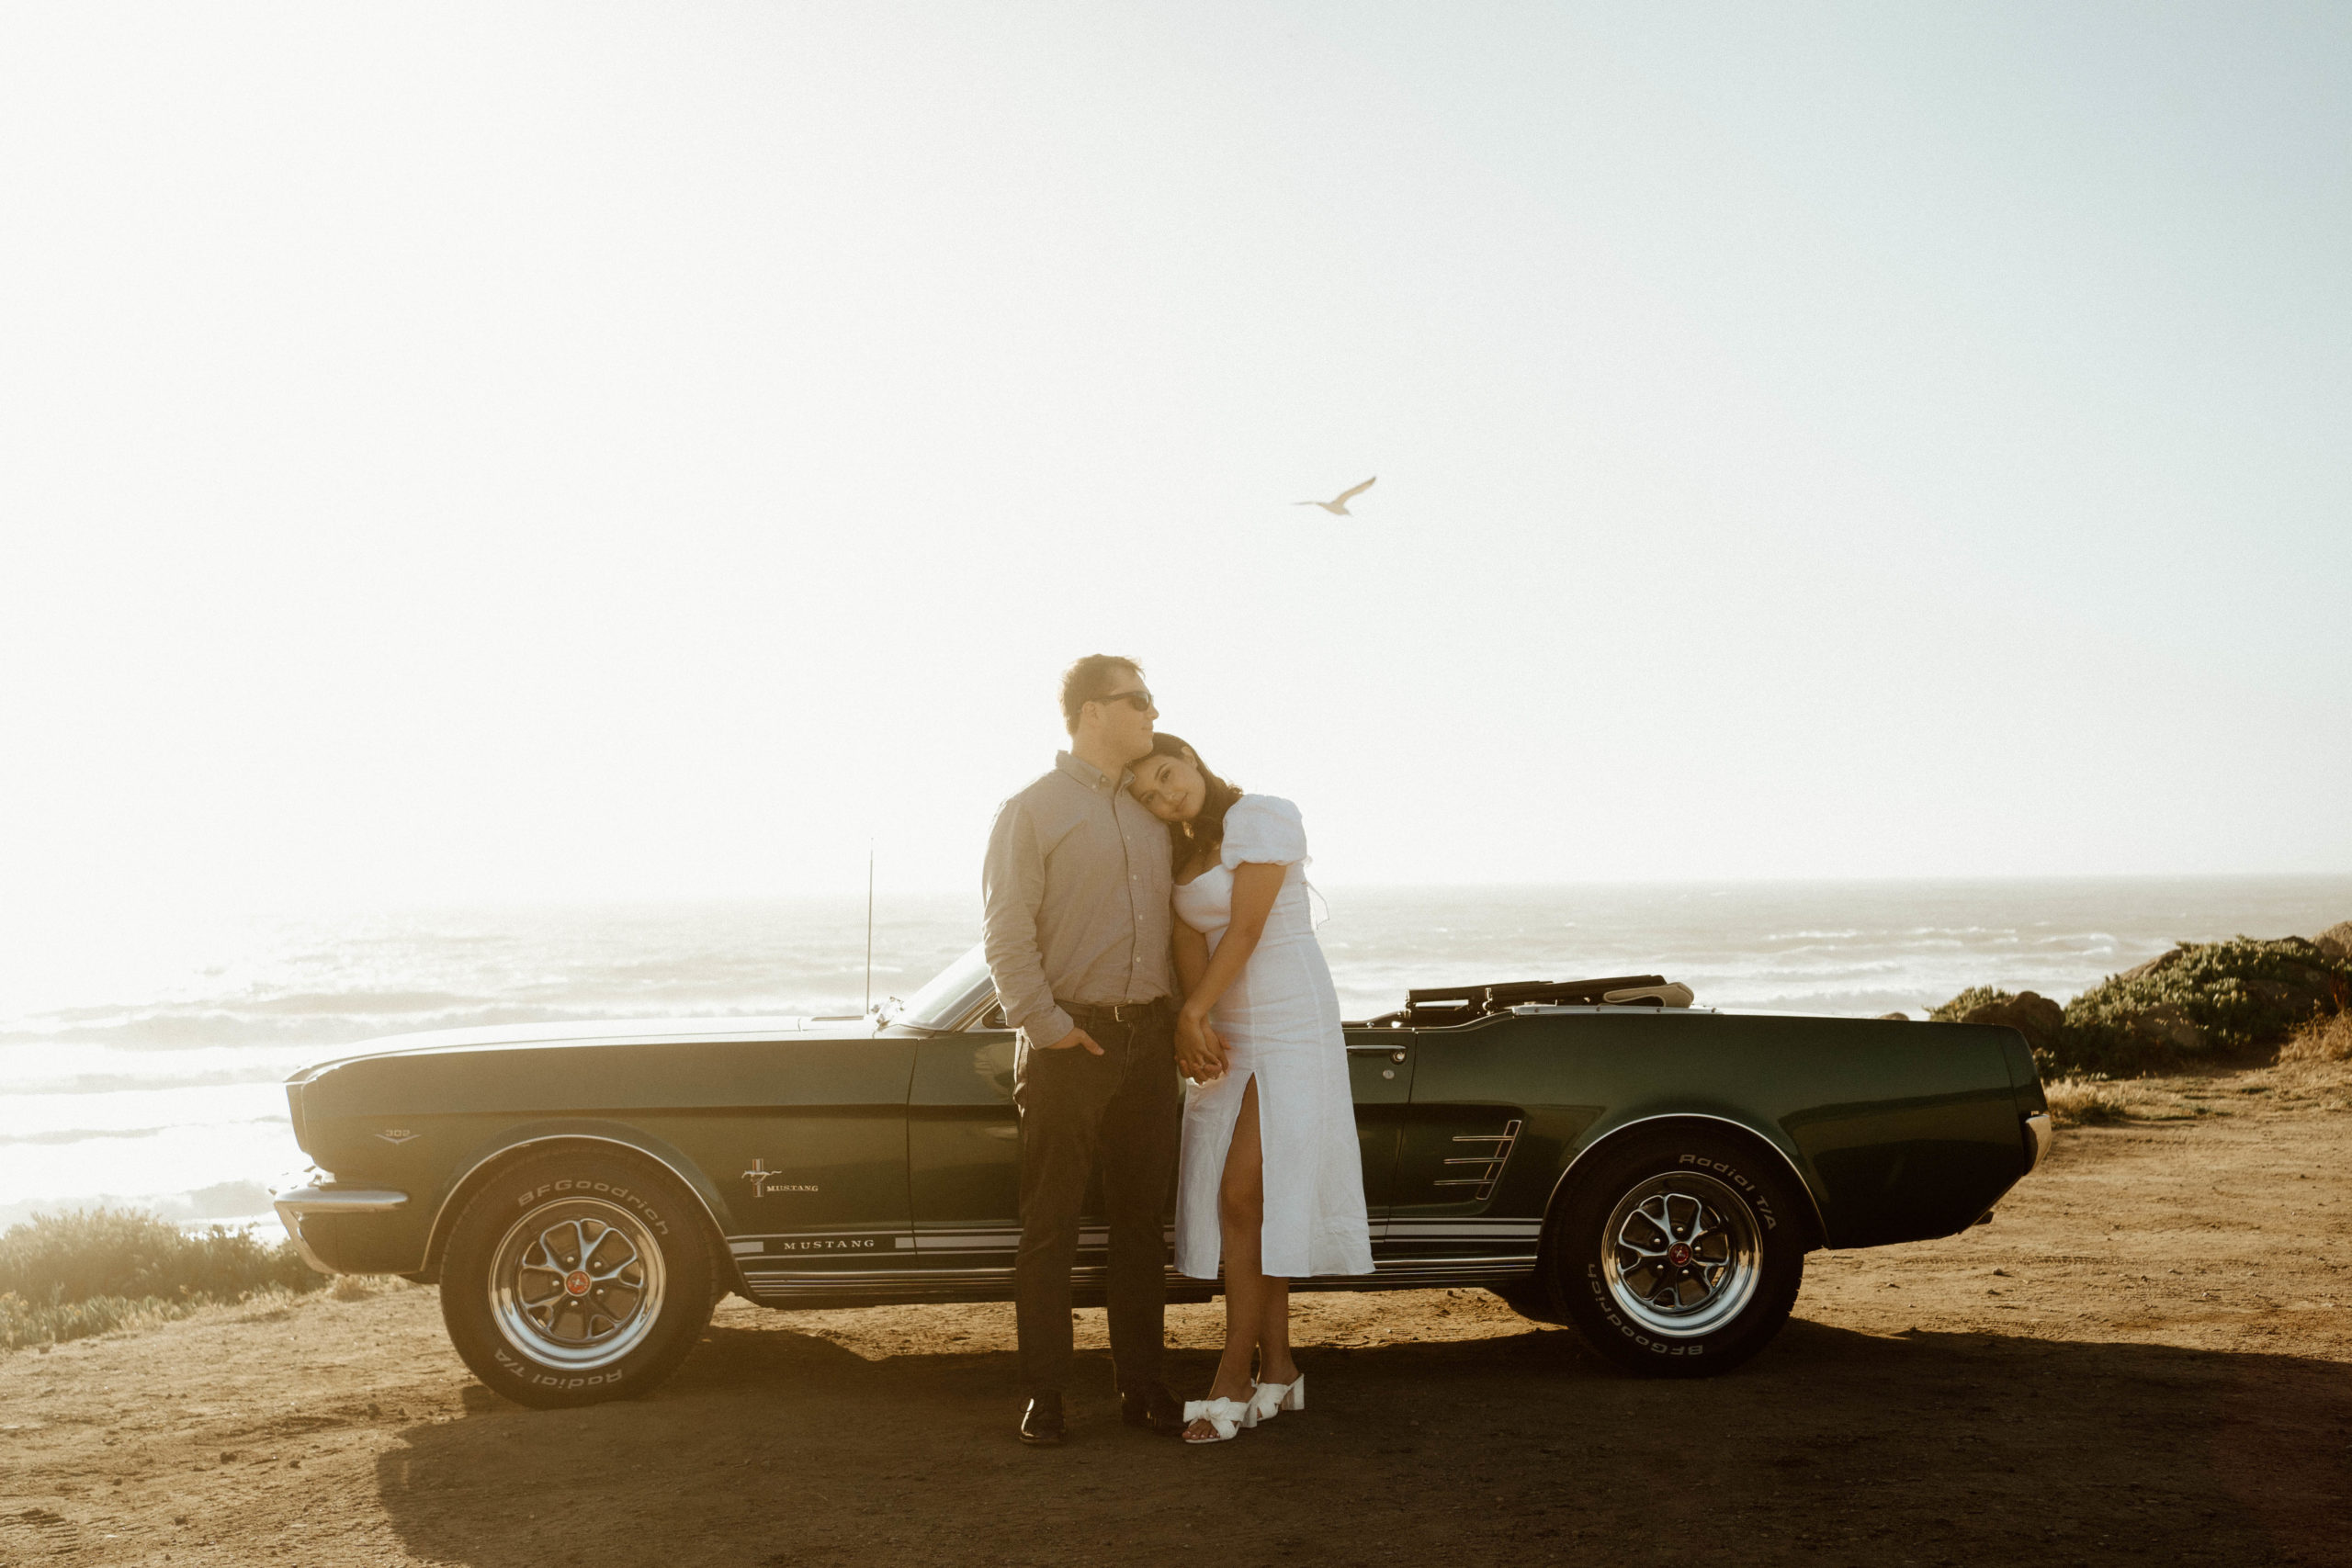 Engaged couple standing in front of vintage car for photos